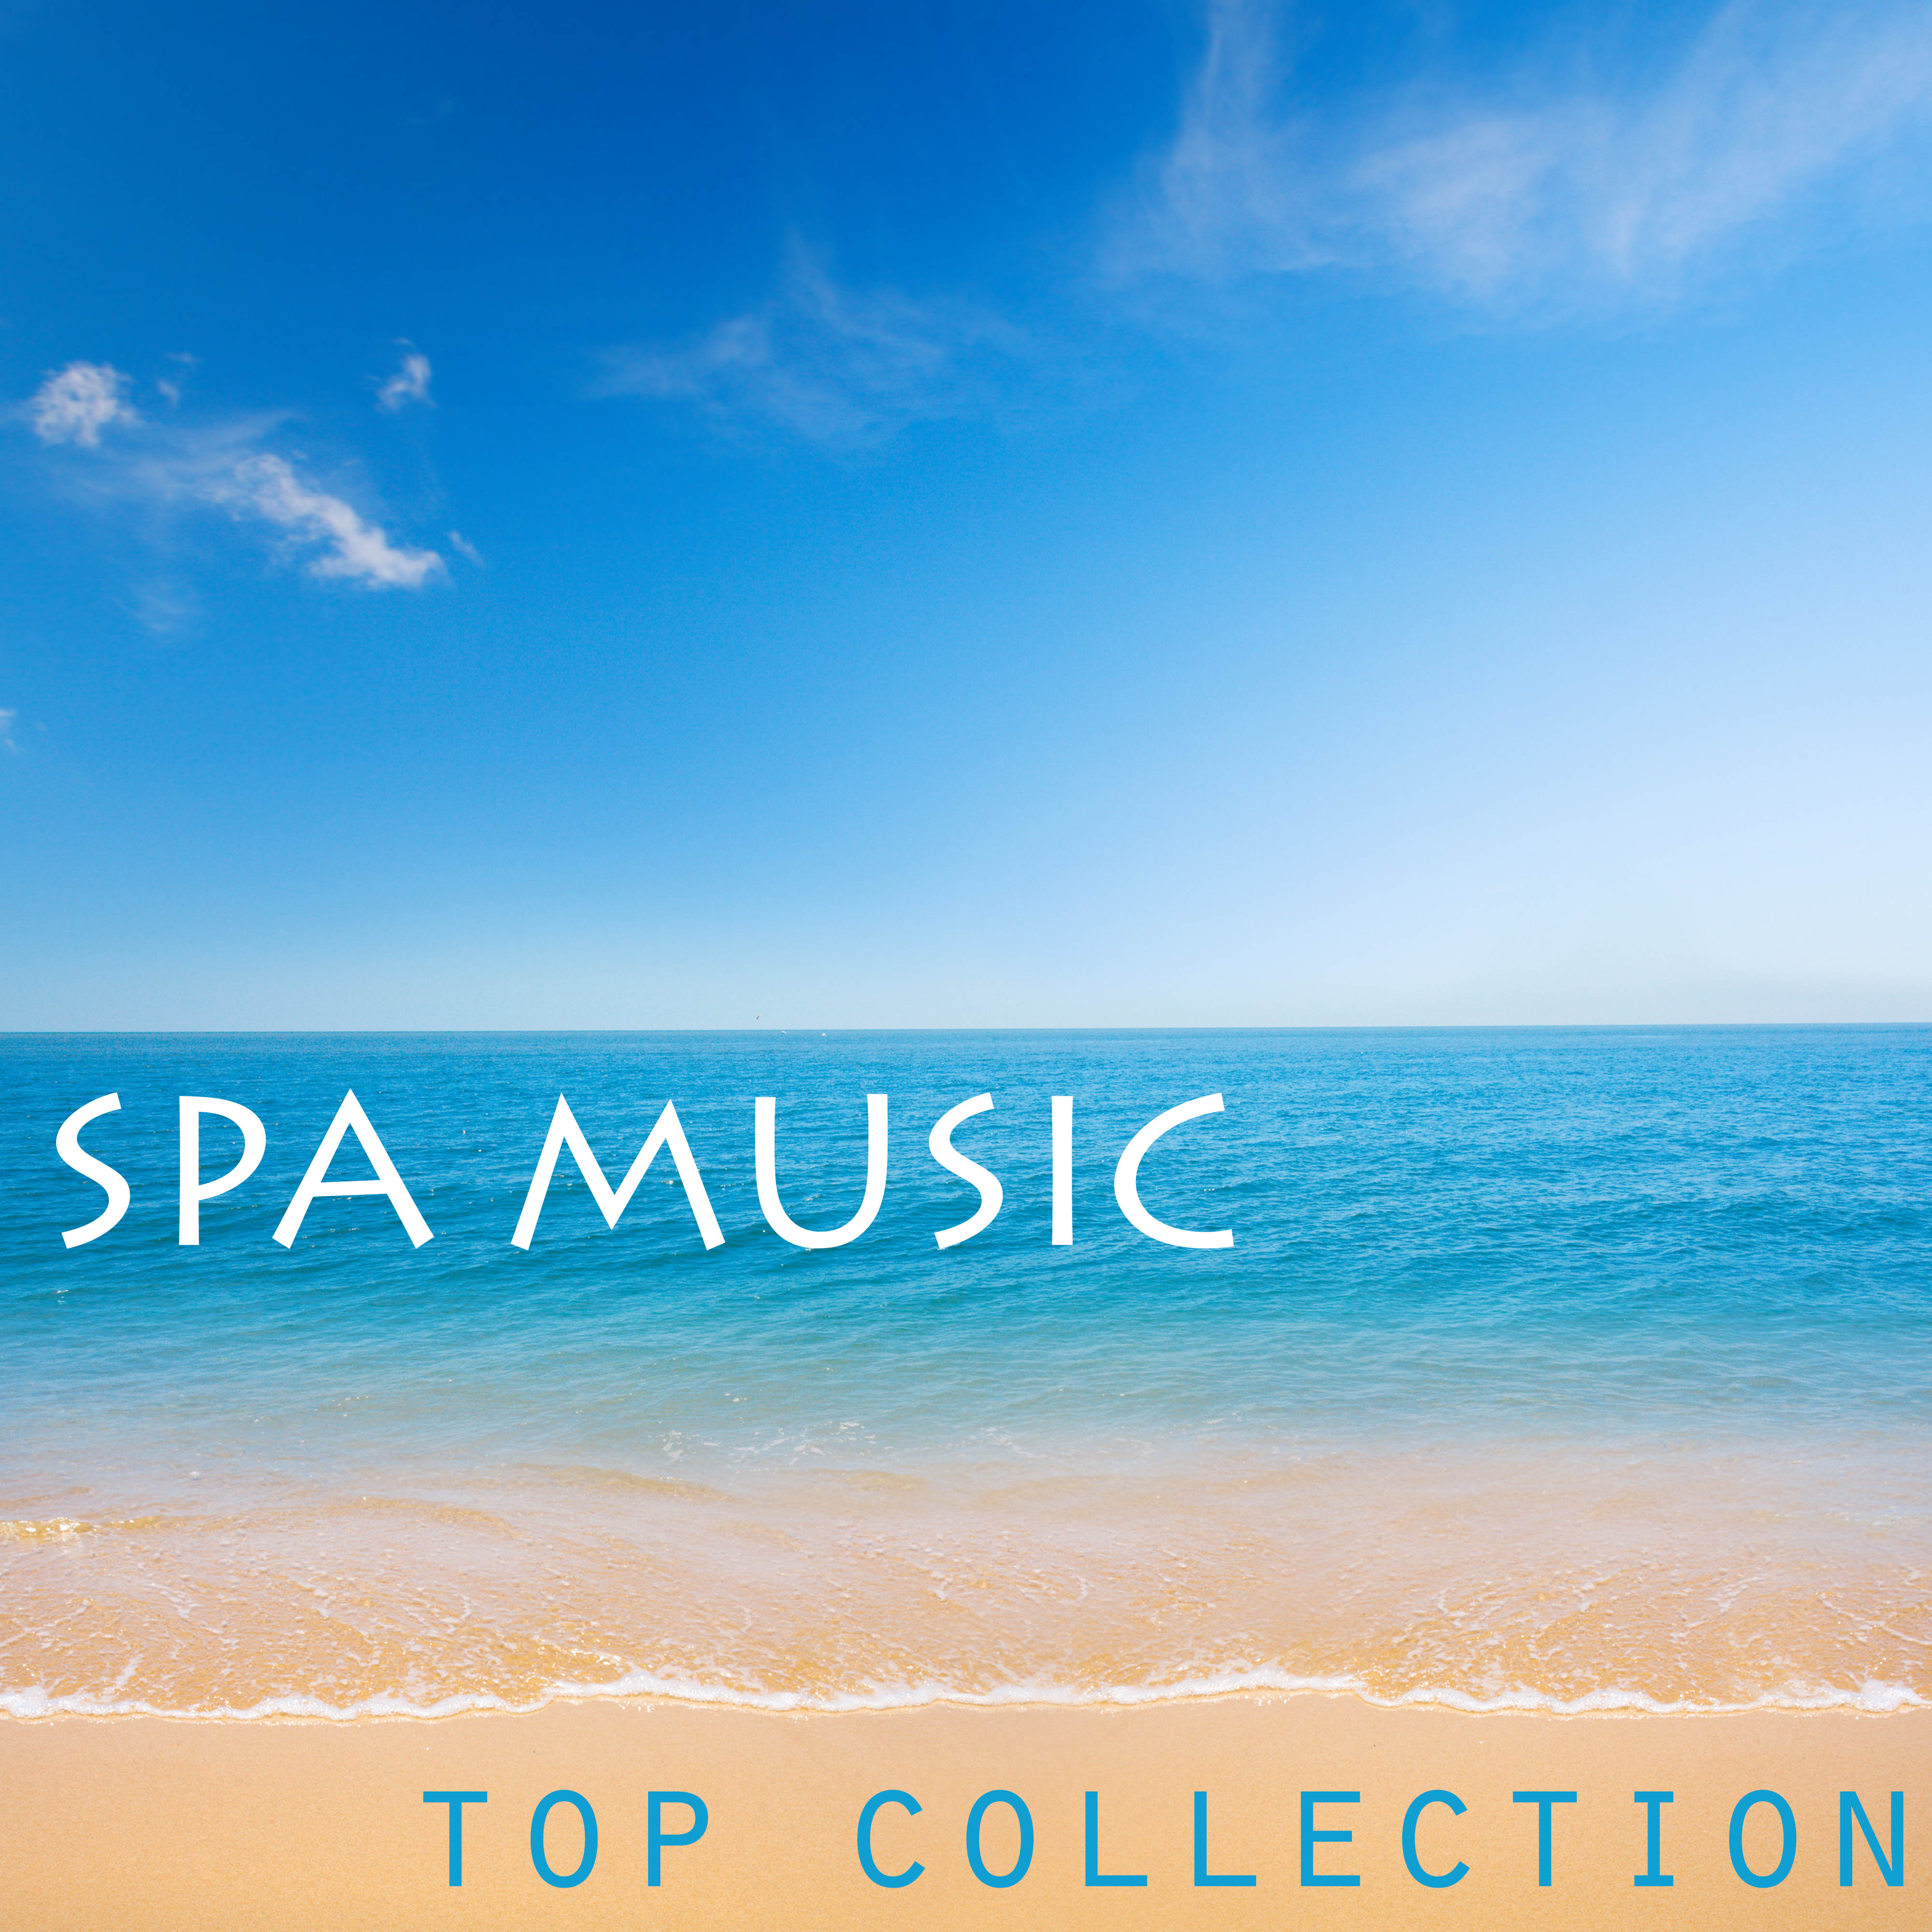 Spa Music Top Collection - 25 Best Hits